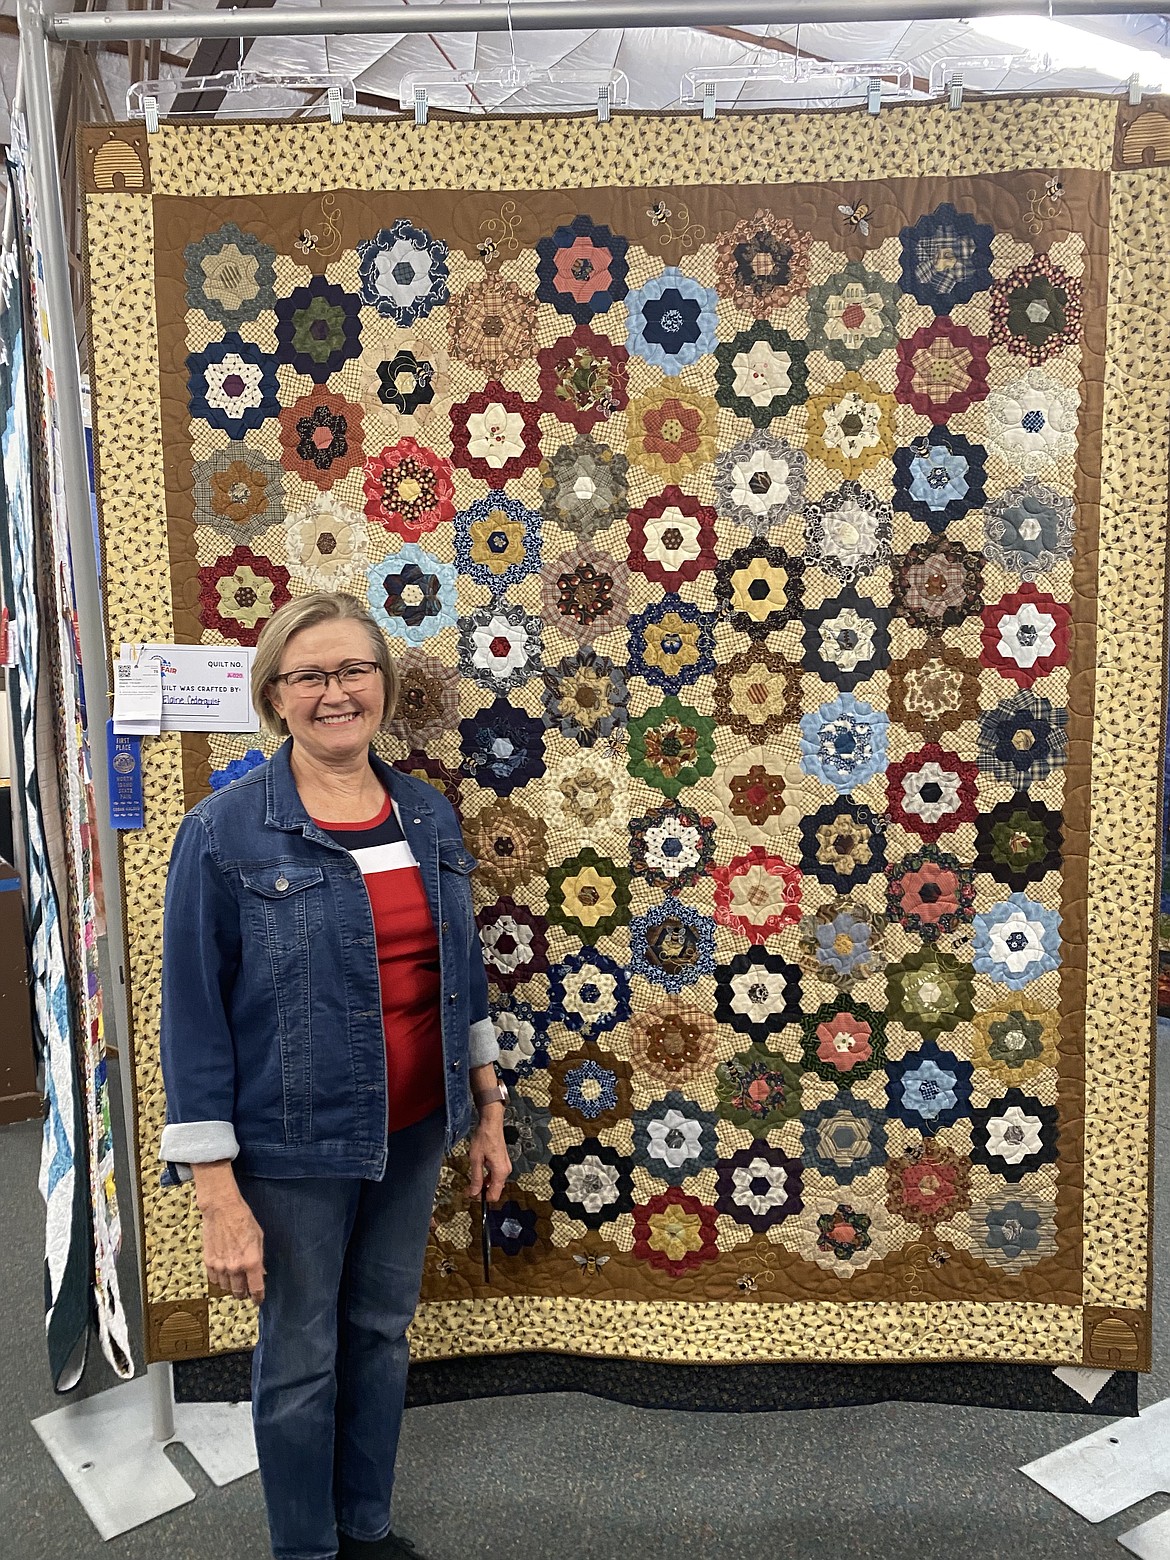 Wednesday at the North Idaho State Fair, Elaine Cederquist stands next to her quilt "The Secret Life of Bees." A hand-pieced design, it required more than 2,200 hand-cut and stitched hexagon pieces and five years to complete.